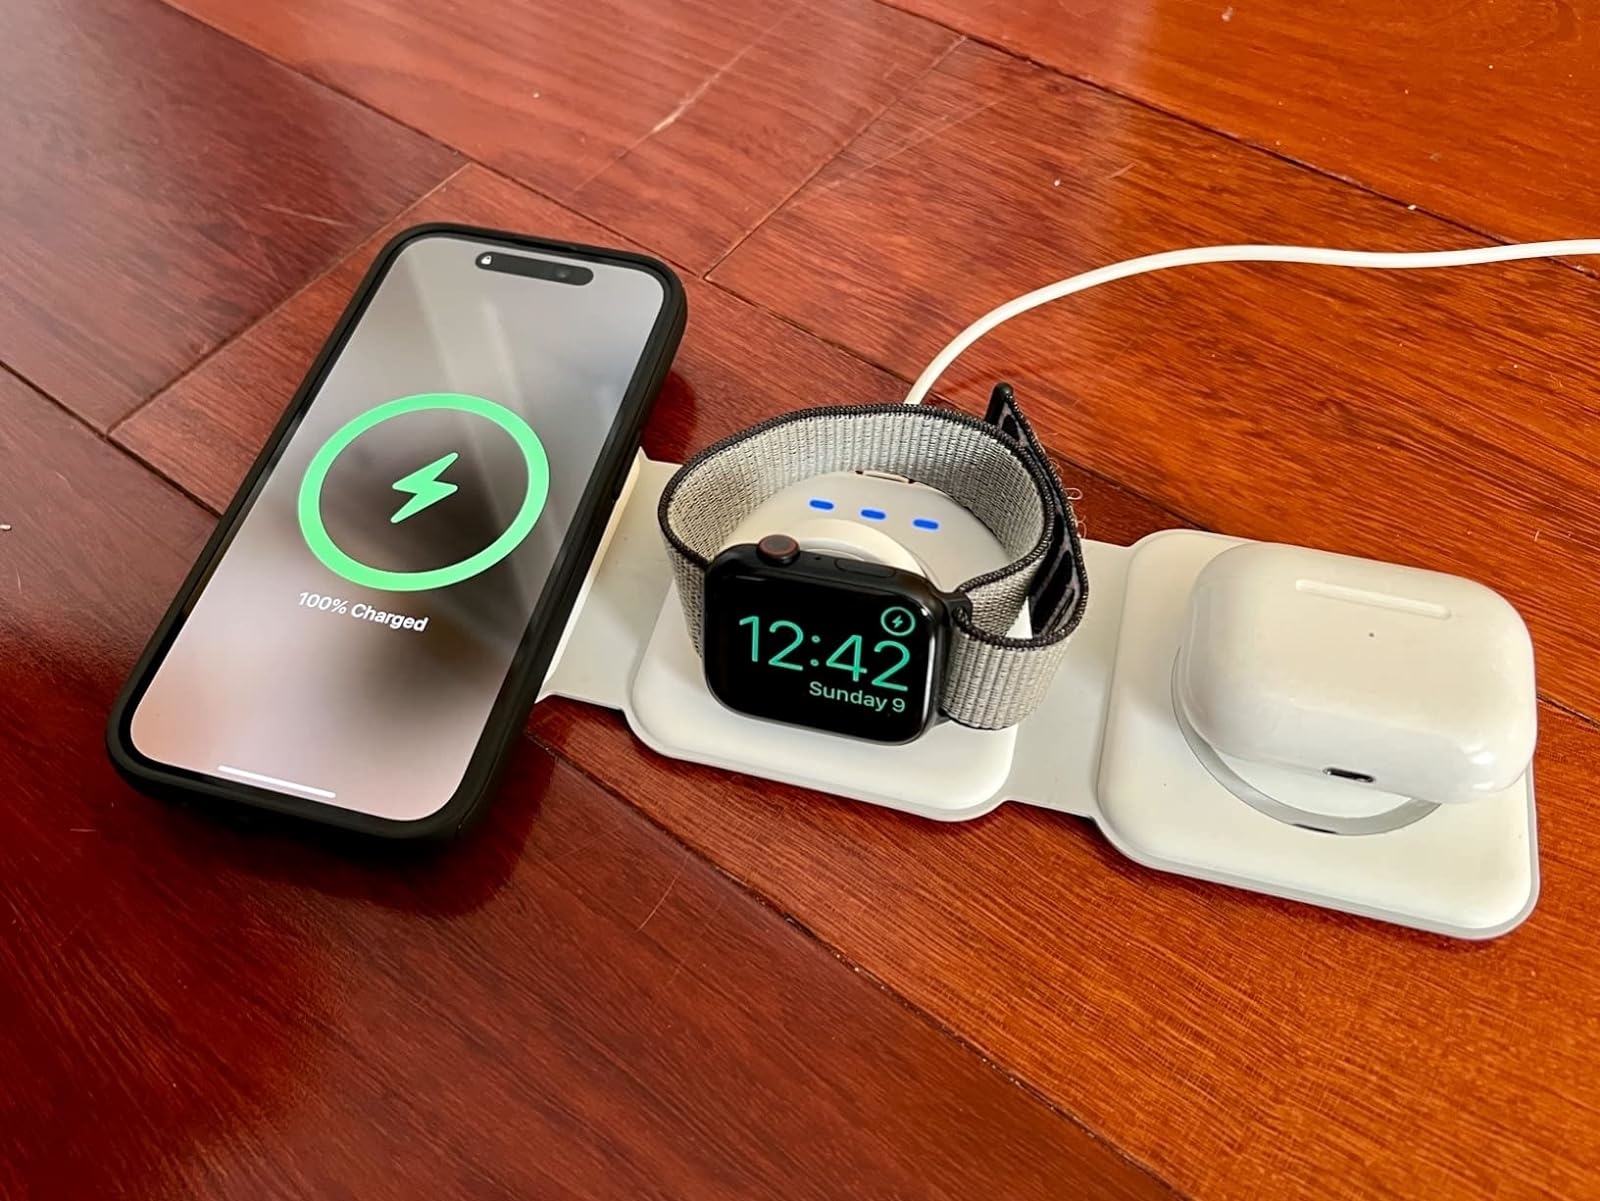 The white charger pad laid out to charge a phone, watch, and AirPods